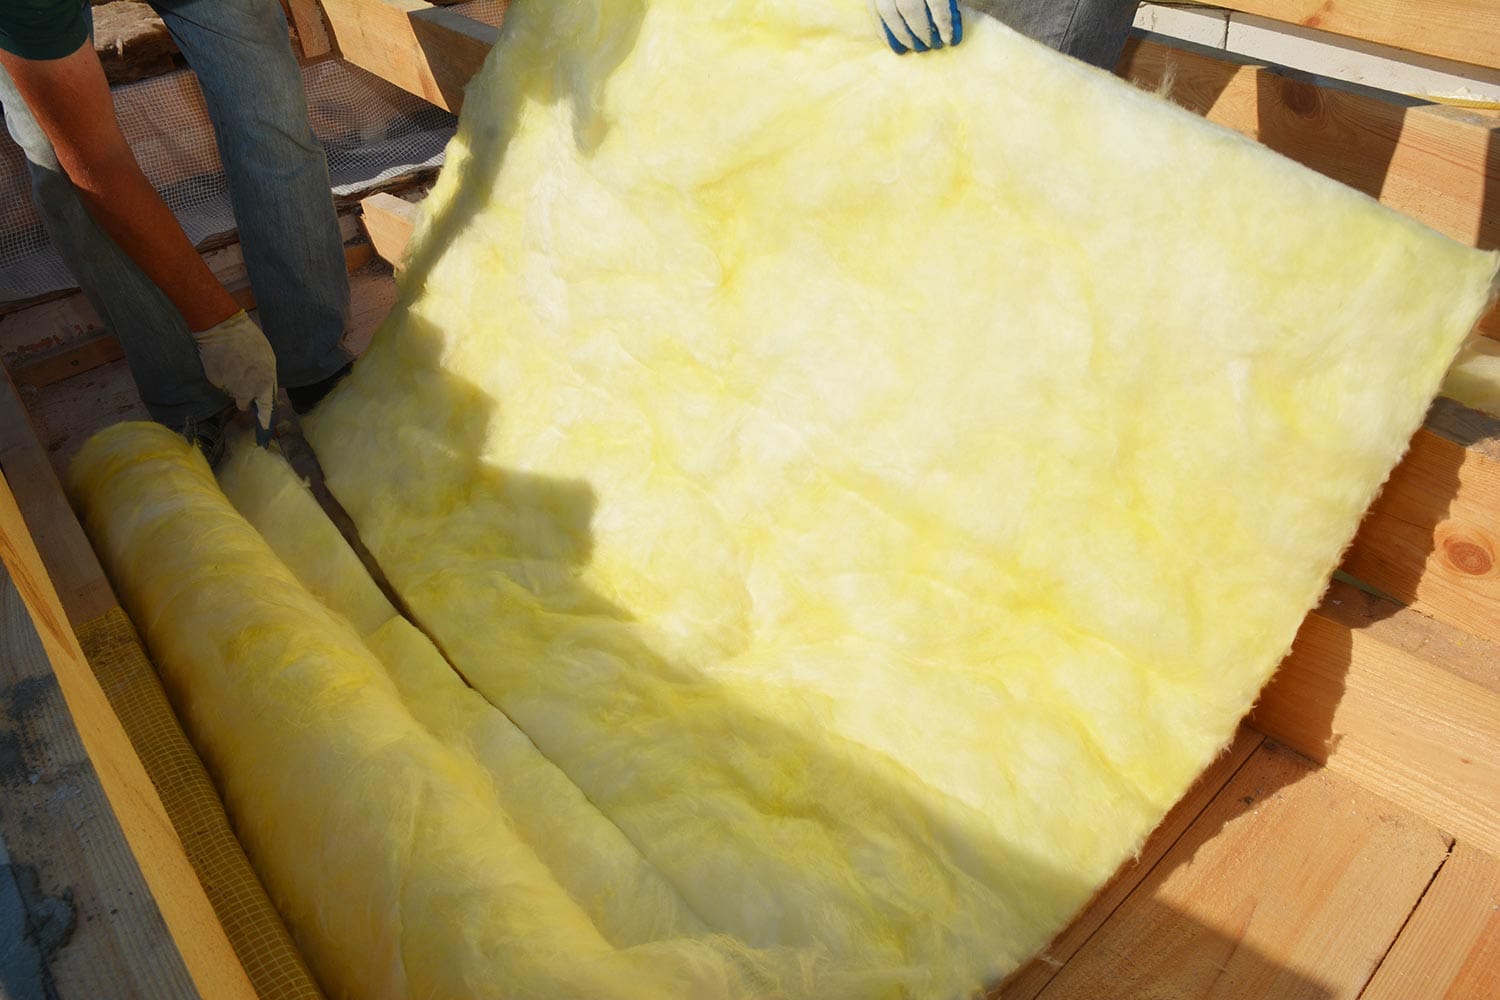 A building contractor is unrolling glass wool batt or blanket, and is cutting a sheet for the roof insulation